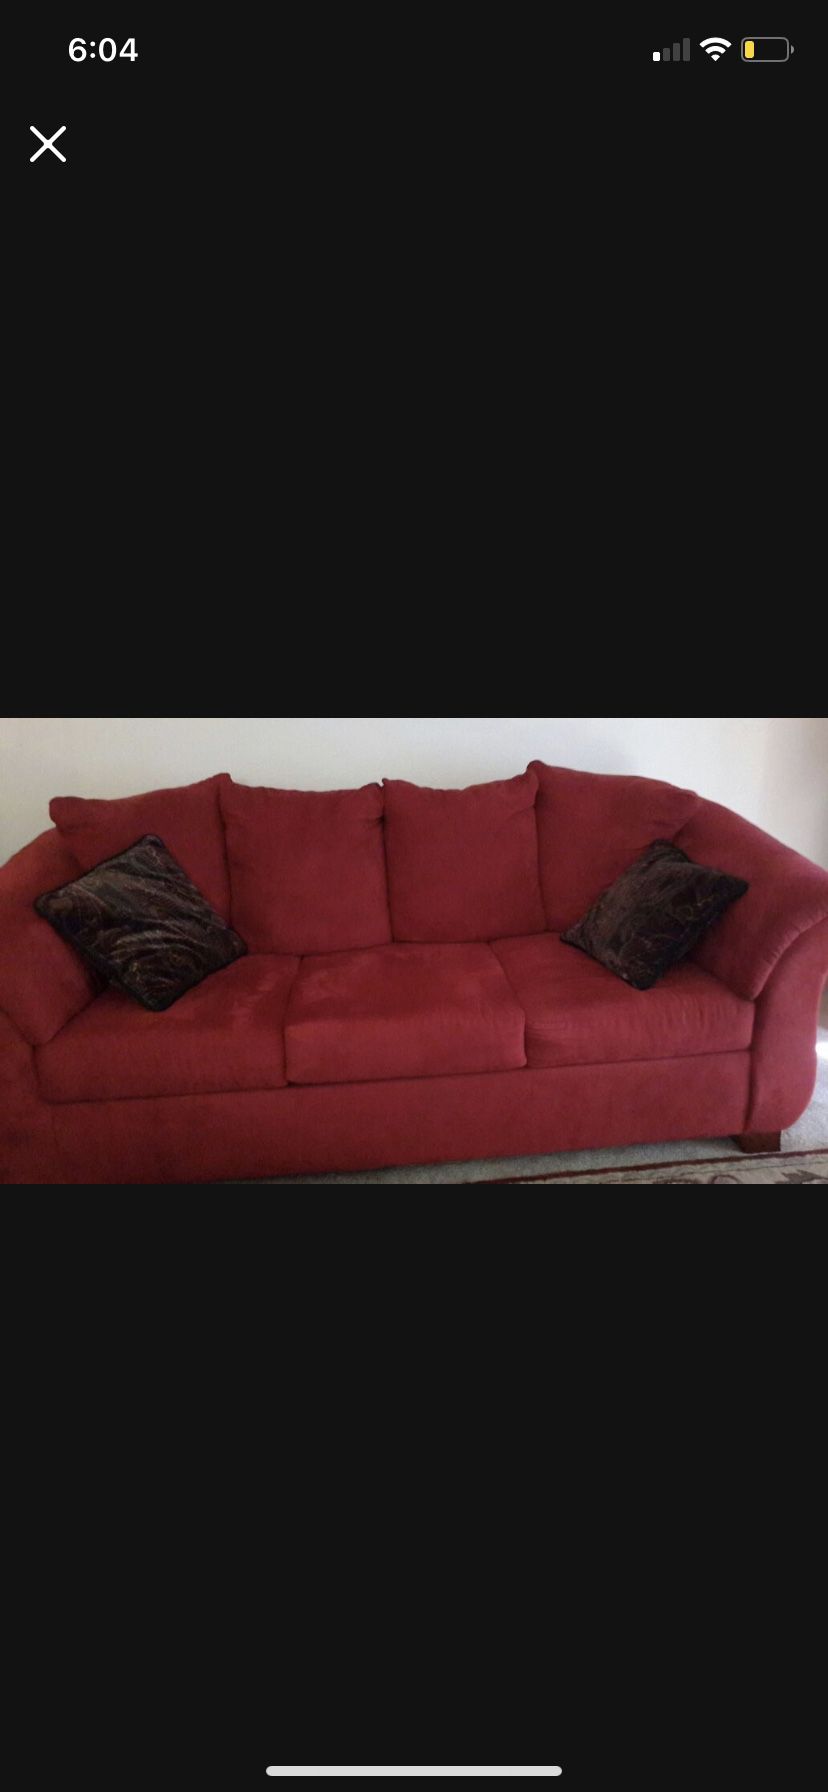 Living Room Set  With Three Seats In The Couch as Love Seat  Looks Like New Almost New